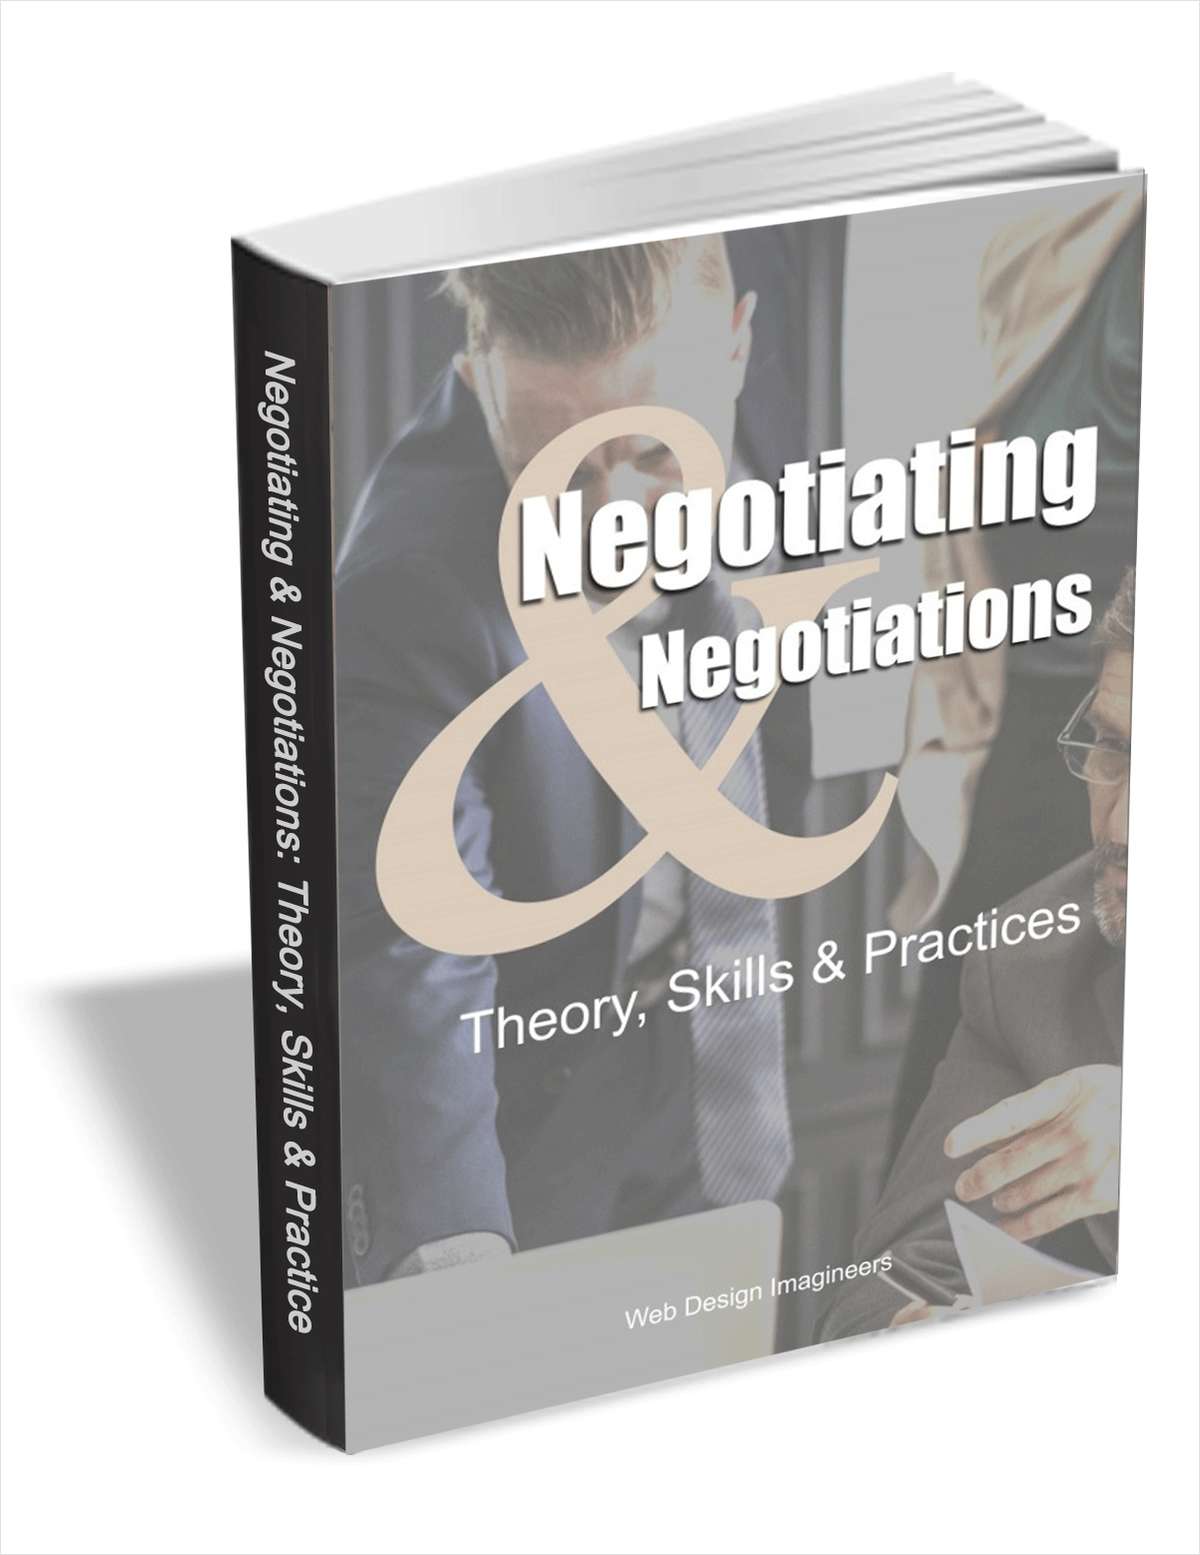 Negotiating & Negotiations - Theory, Skills & Practices